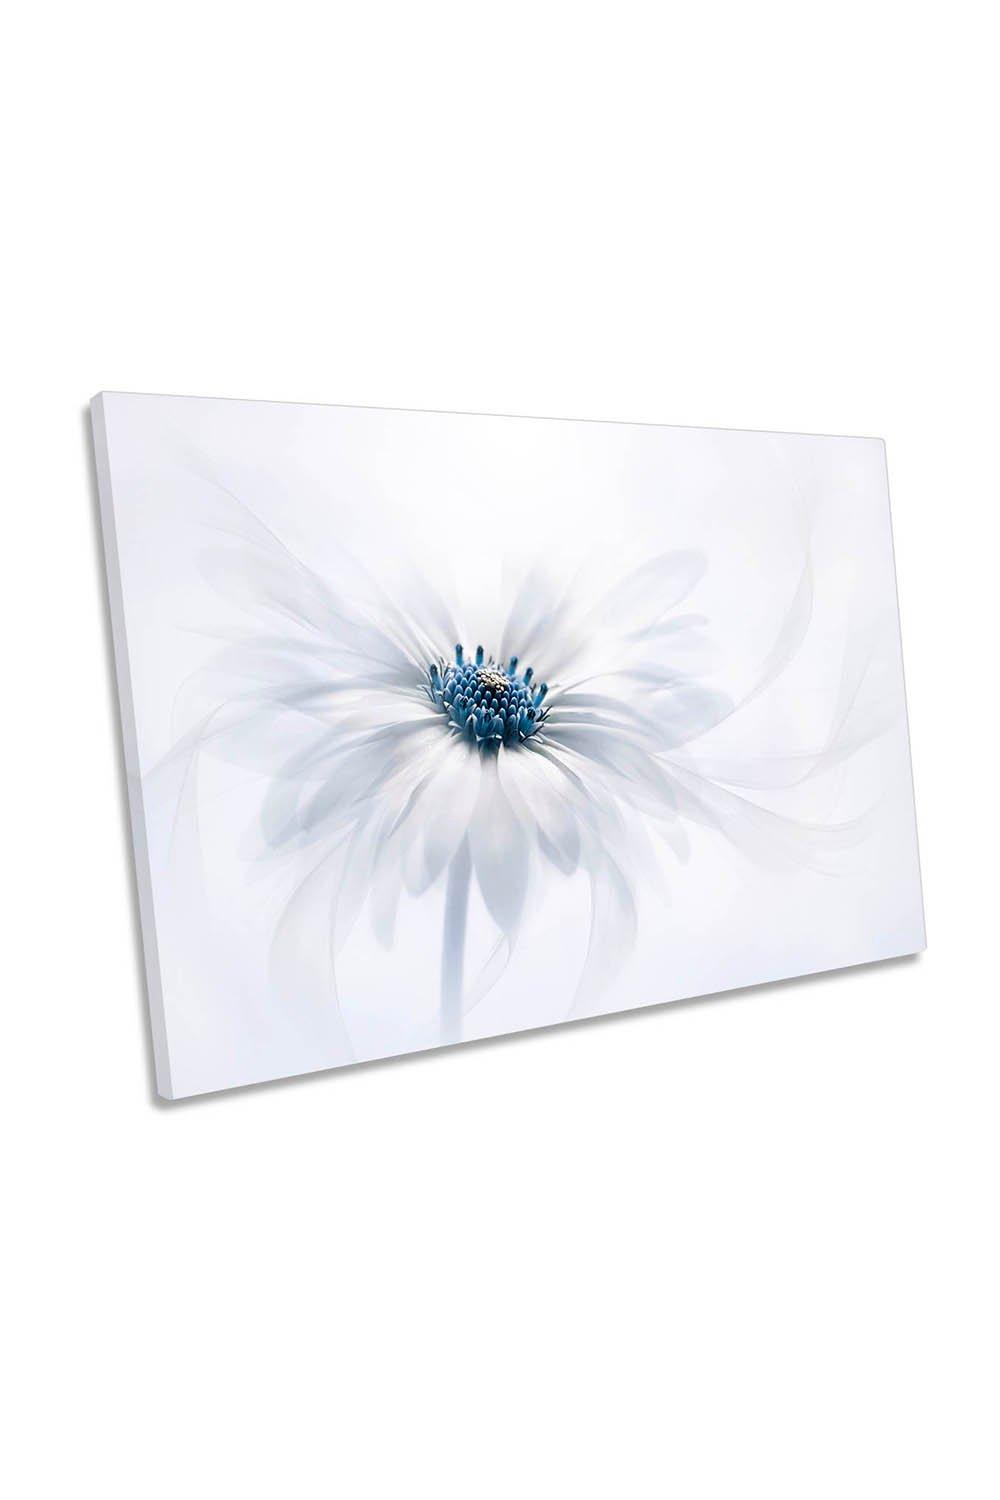 Serenity White Floral Flower Daisy Canvas Wall Art Picture Print